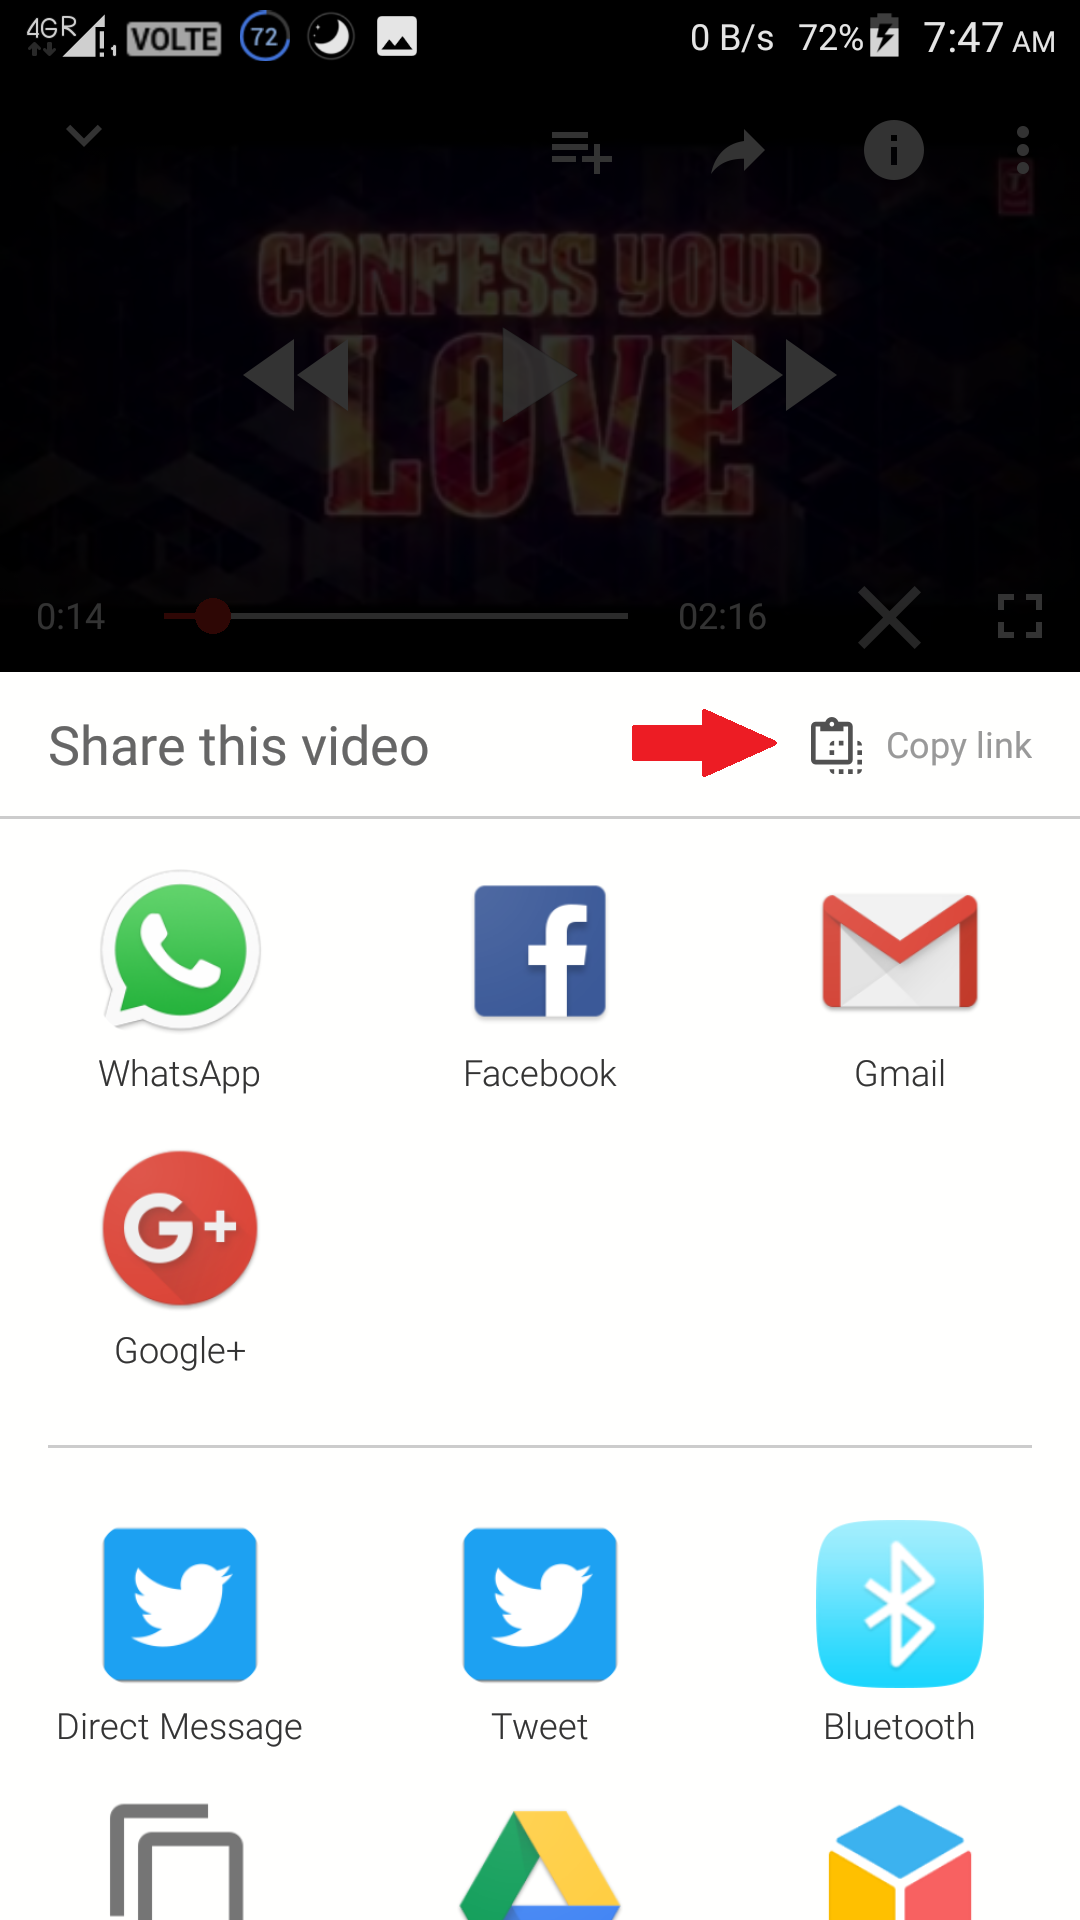 how to download videos on youtube for free